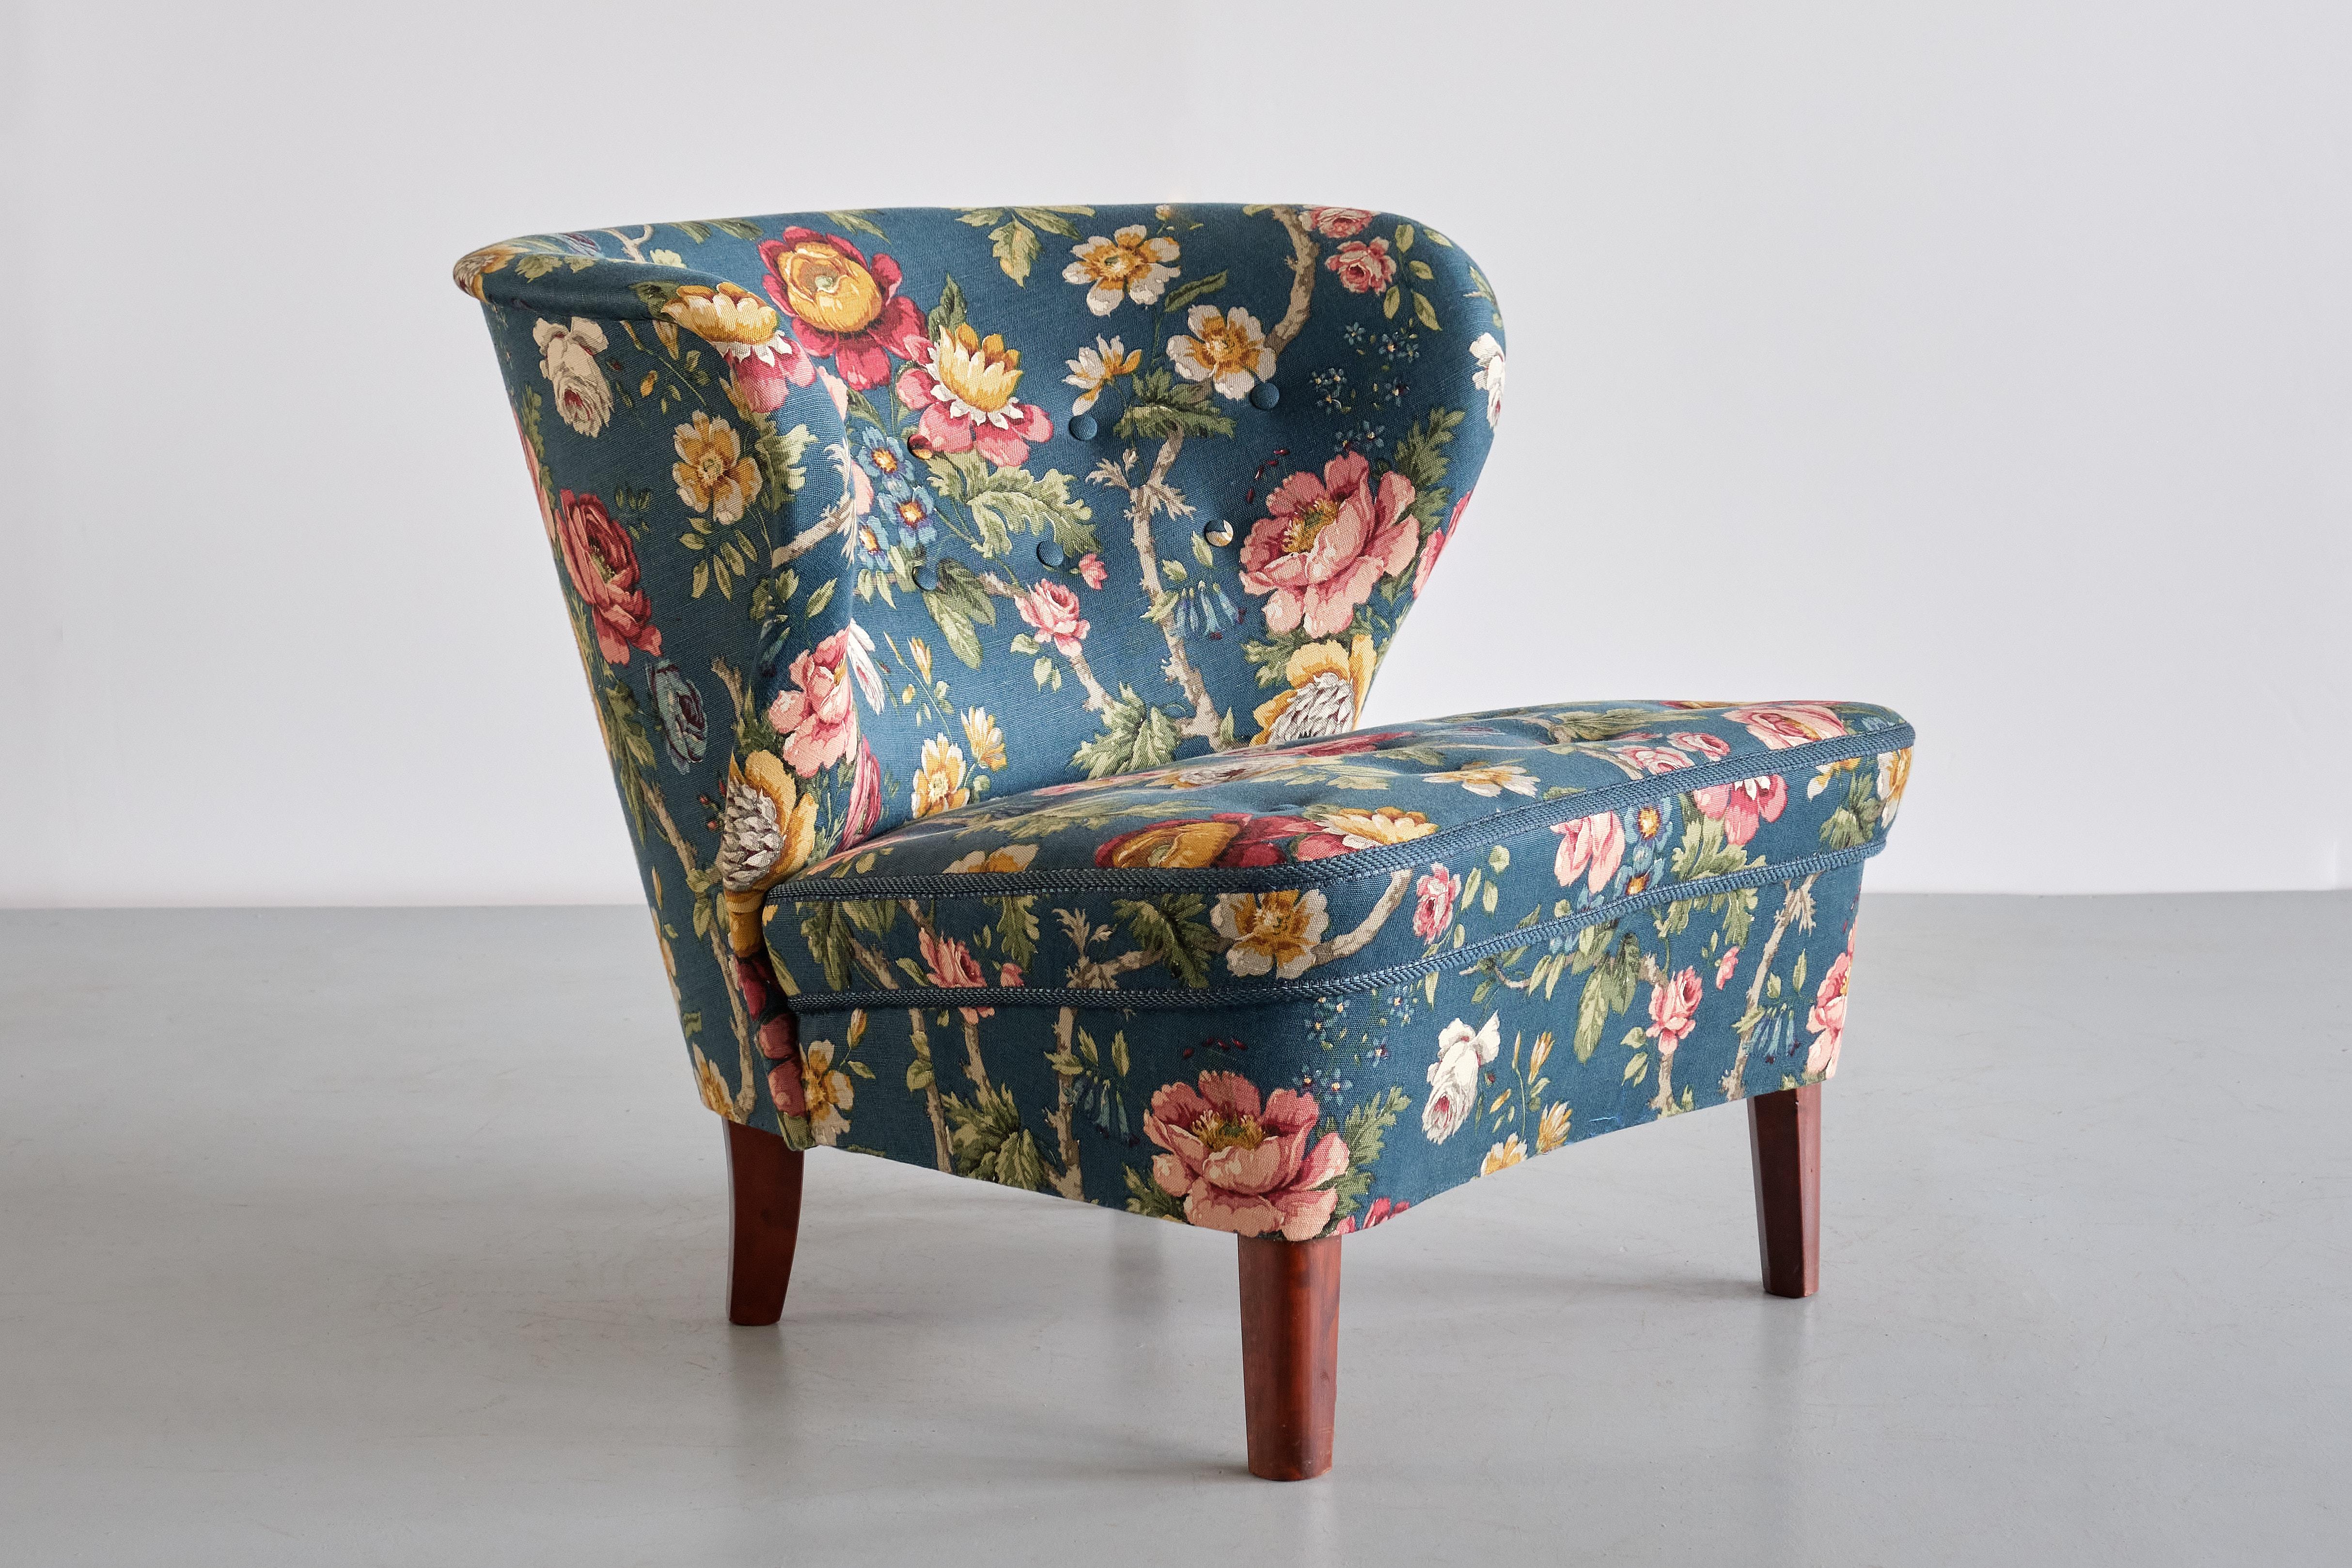 Gösta Jonsson Lounge Chair in Floral Fabric and Birch, Sweden, 1940s For Sale 7